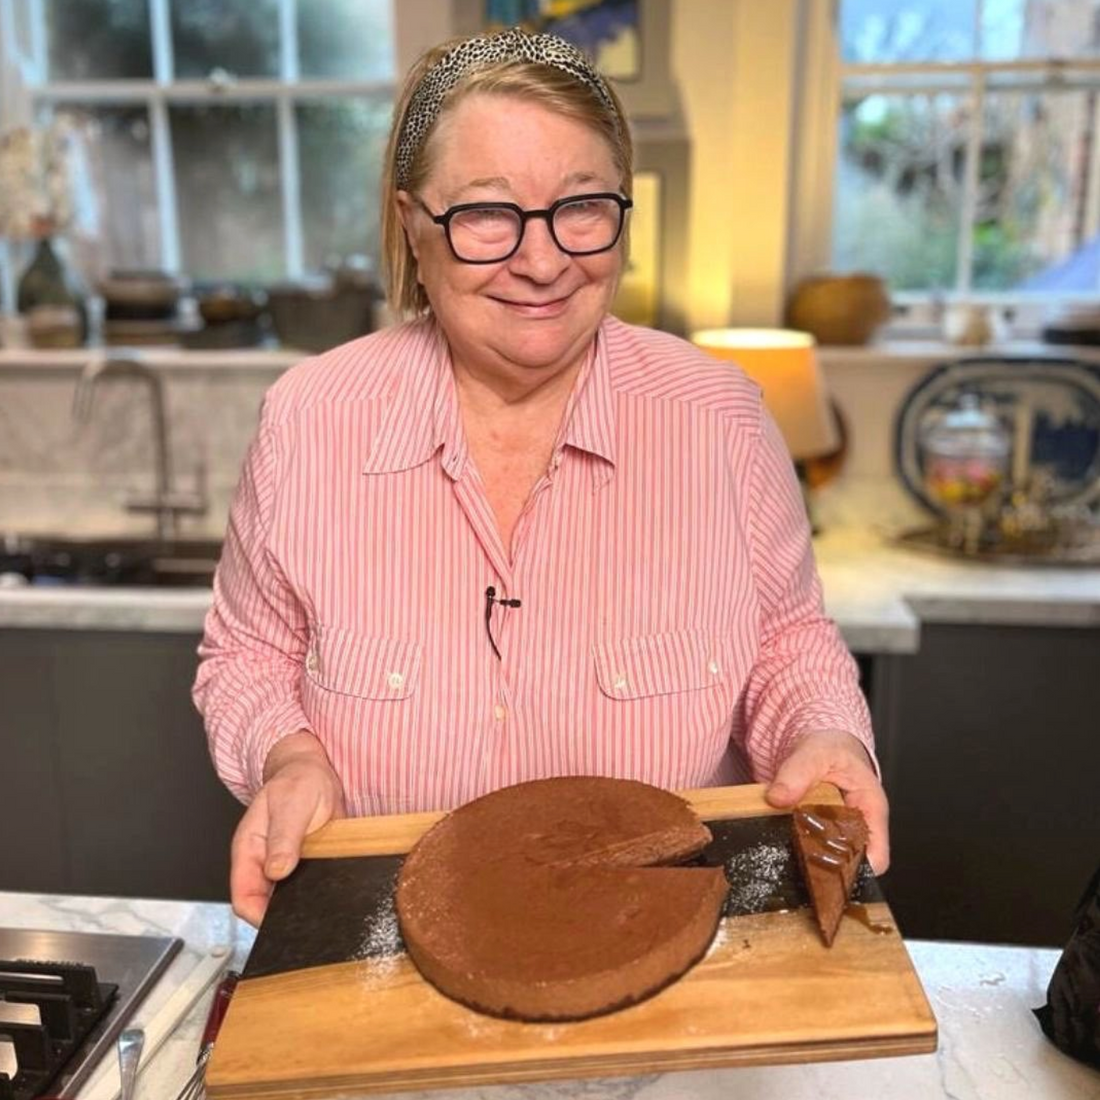 Rosemary's Chocolate Truffle Cake, Biscuit base and Butterscotch Sauce - Full Recipe & Ingredients